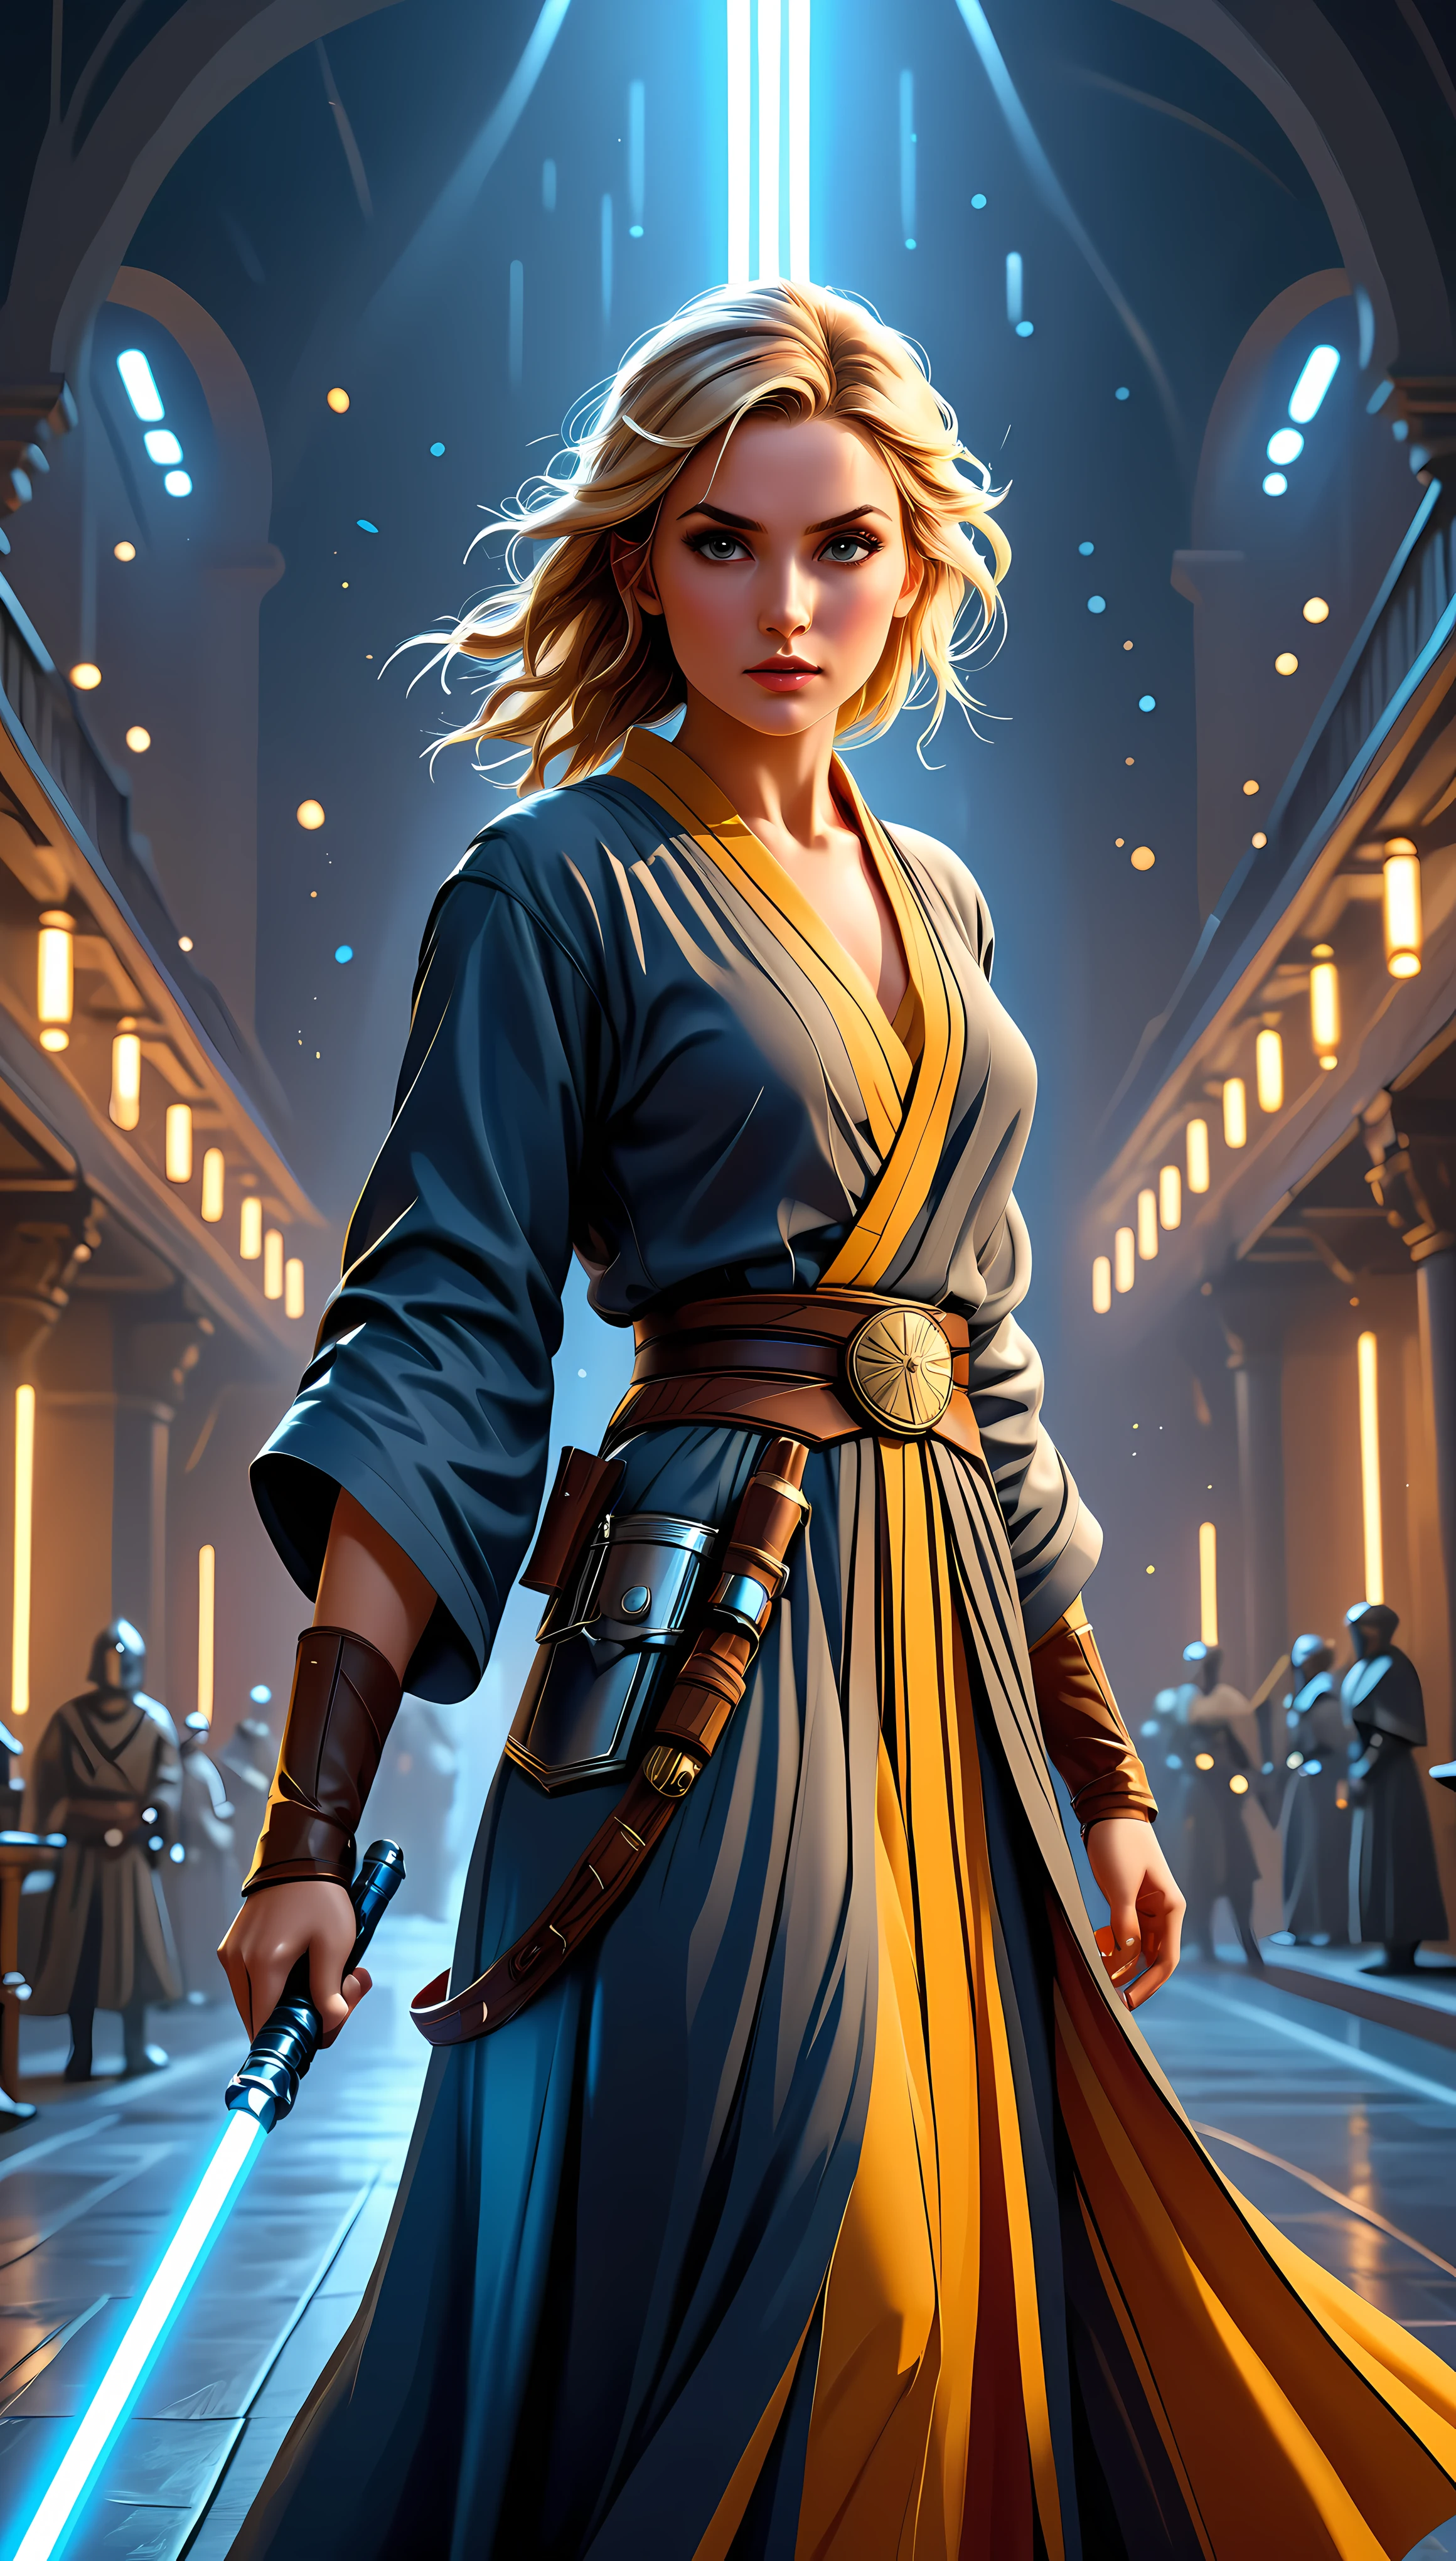 ((Masterpiece in maximum 16K resolution):1.6), ((vector cartoon illustration:)1.5), ((Vector art):1.4), ((Geometric style and minimalism):1.5), ((Wide angle painting):1.2) | (Cinematic photo of a fighting Female Jedi), (Supermodel beauty with braided blonde hair and aquiline nose), ((Full body):1.2), ((Jedi Robe):1.2), ((Light Sabre):1.3), ((tyndall effect):1.1), ((golden hour):1.2), ((sense of action):1.1), (shimmer), (visual experience), (Realism), (Realistic), award-winning graphics, dark shot, film grain, extremely detailed, Digital Art, rtx, Unreal Engine, scene concept anti glare effect, All captured with sharp focus. Rendered in ultra-high definition with UHD and retina quality, this masterpiece ensures anatomical correctness and textured skin with super detail. With a focus on high quality and accuracy, this award-winning portrayal captures every nuance in stunning 16k resolution, immersing viewers in its lifelike depiction. Avoid extreme angles or exaggerated expressions to maintain realism. ((perfect_composition, perfect_design, perfect_layout, perfect_detail, ultra_detailed)), ((enhance_all, fix_everything)), More Detail, Enhance. Rendered in ultra-high definition with UHD and retina quality, this masterpiece ensures anatomical correctness and textured skin with super detail. With a focus on high quality and accuracy, this award-winning portrayal captures every nuance in stunning 16k resolution, immersing viewers in its lifelike depiction. Avoid extreme angles or exaggerated expressions to maintain realism. ((perfect_composition, perfect_design, perfect_layout, perfect_detail, ultra_detailed)), ((enhance_all, fix_everything)), More Detail, Enhance.